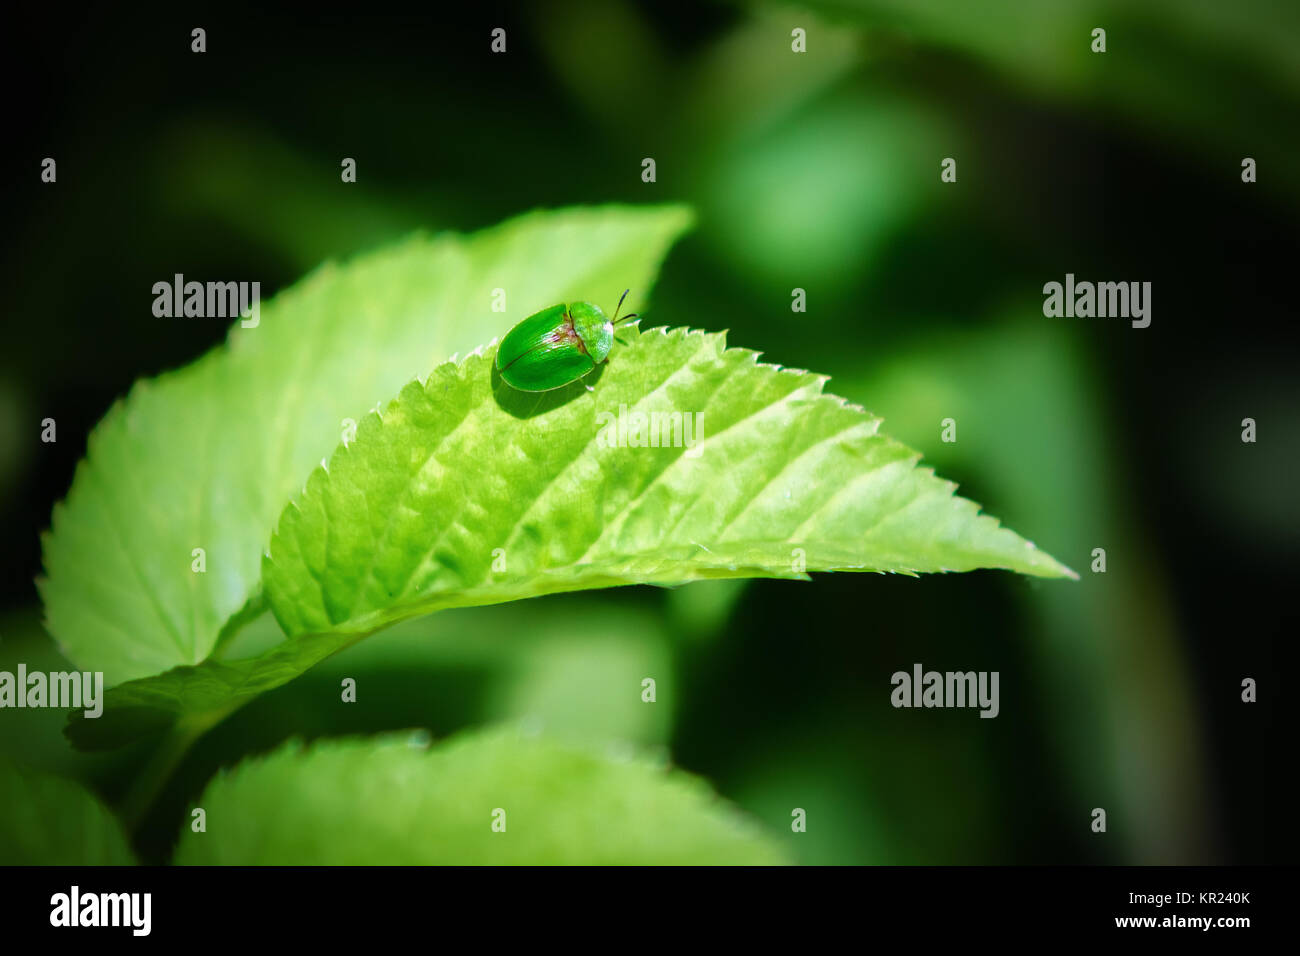 Small green beetle on a leaf Stock Photo